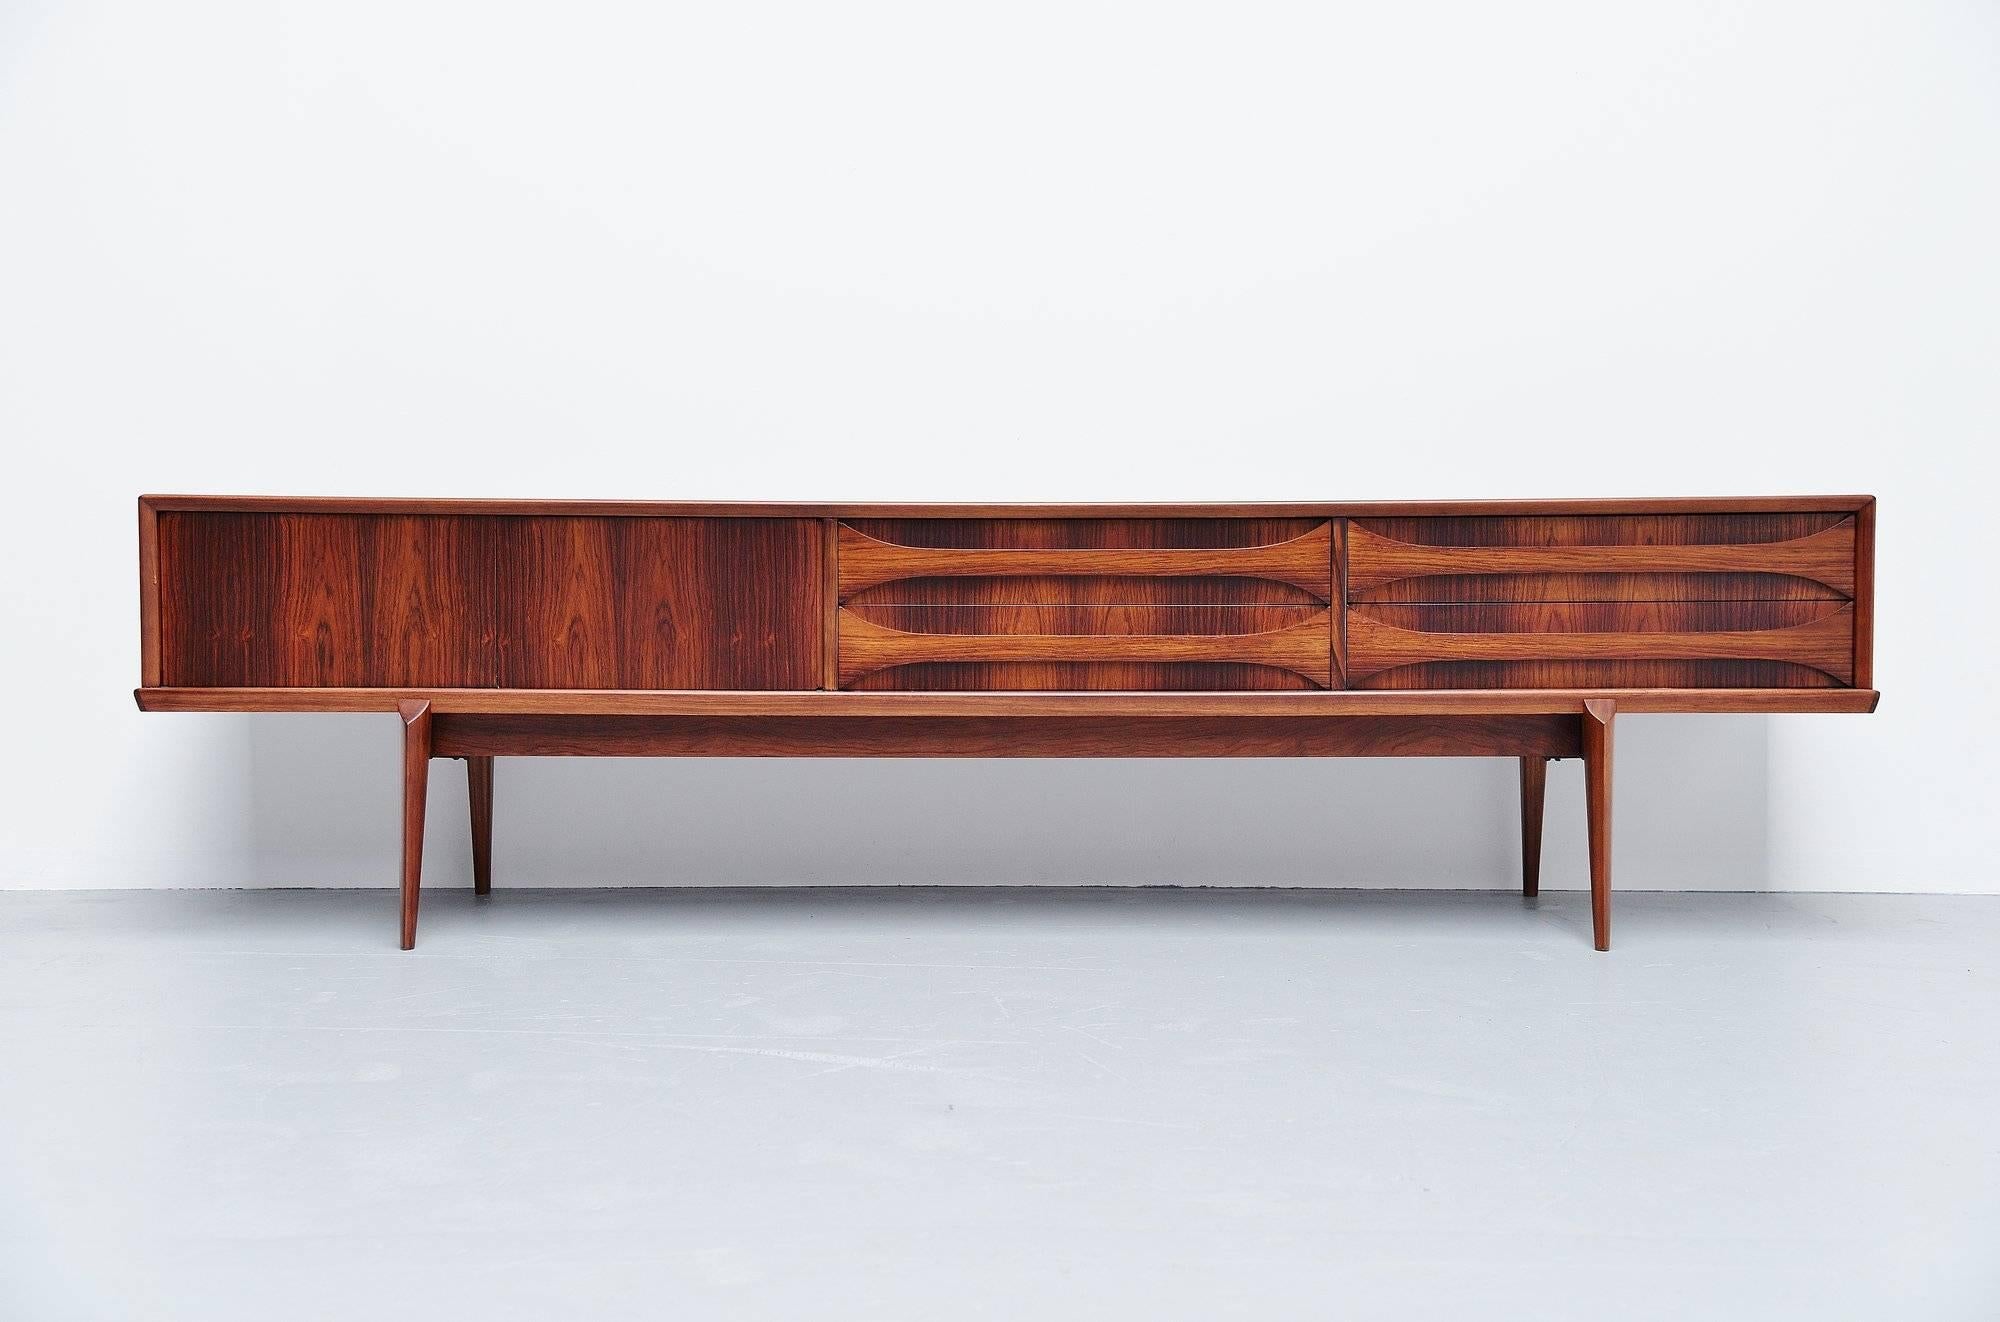 Very nice and quality low sideboard designed by Oswald Vermaercke for V-Form, Belgium, 1959. This amazing credenza has a very nice and warm rosewood color and is fully refinished into perfect condition. The designs by Oswald Vermaercke are visibly